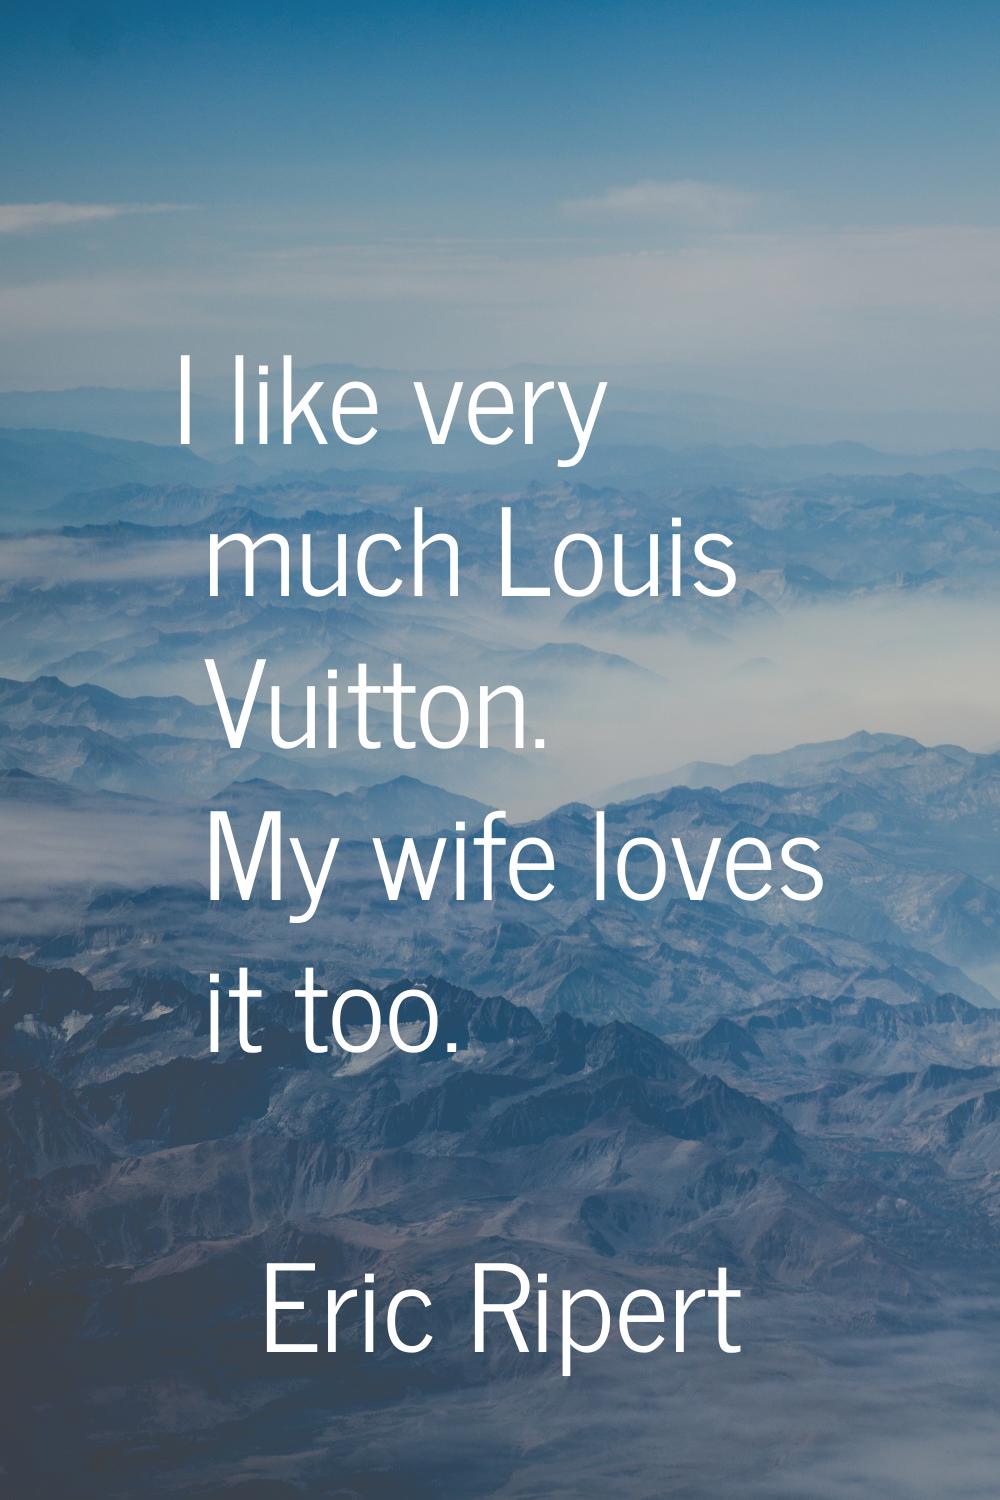 I like very much Louis Vuitton. My wife loves it too.